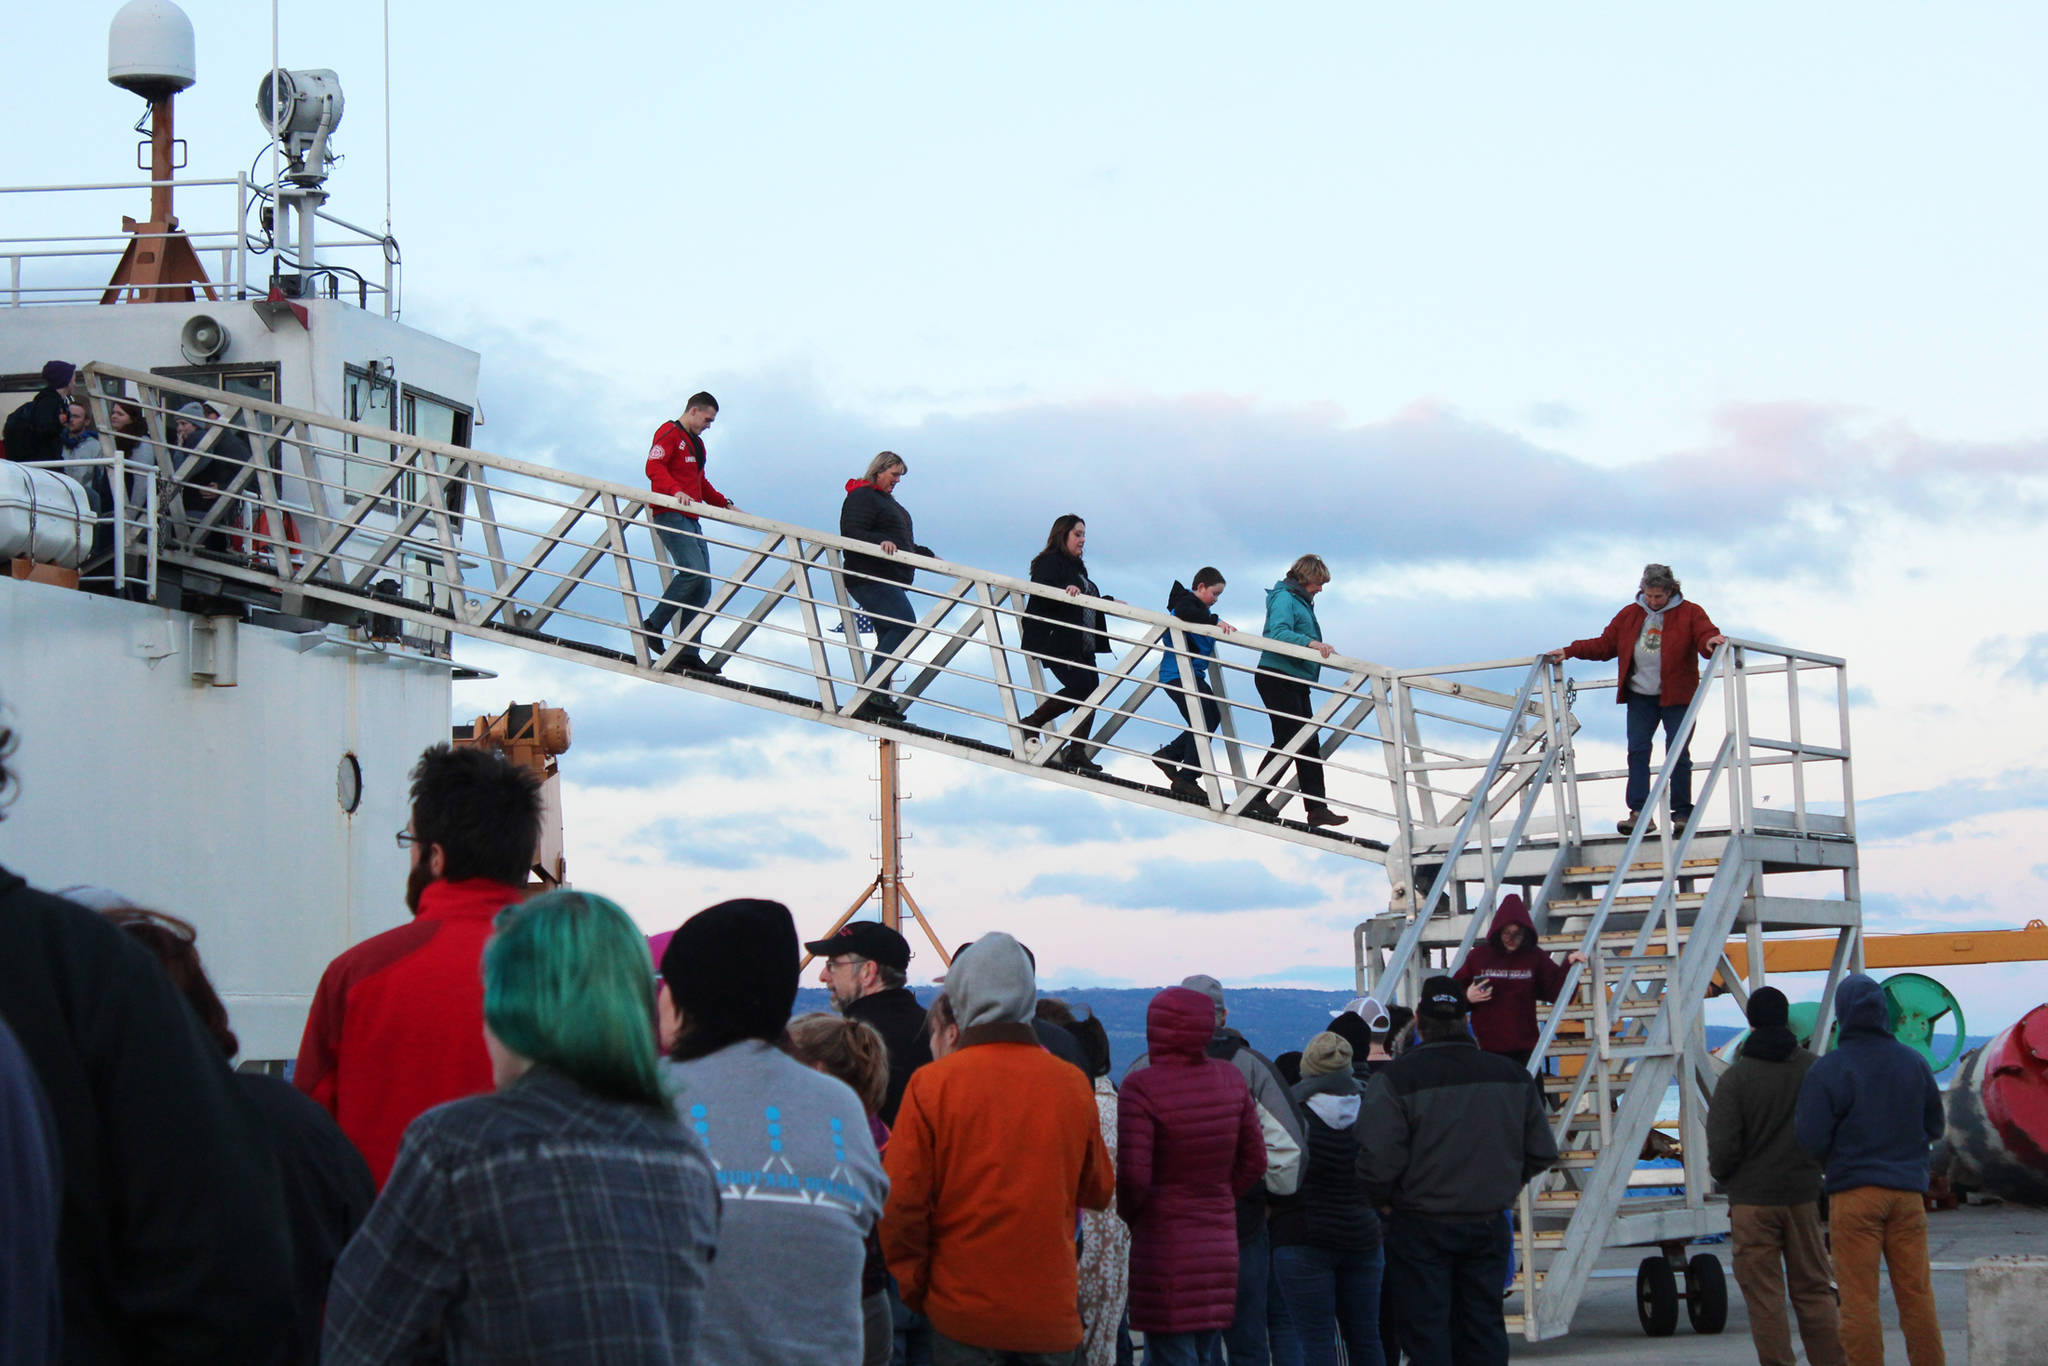 Fresh from being frightened, a group of people walks down off the U.S. Coast Guard Cutter Hickory while dozens more wait in line for this year’s Haunted Hickory event Thursday, Oct. 26, 2017 in Homer, Alaska. Last year, about 1,000 people queued up at the Homer Spit to take a spooky tour of the ship, which the crew spends about two days transforming. (Photo by Megan Pacer/Homer News)